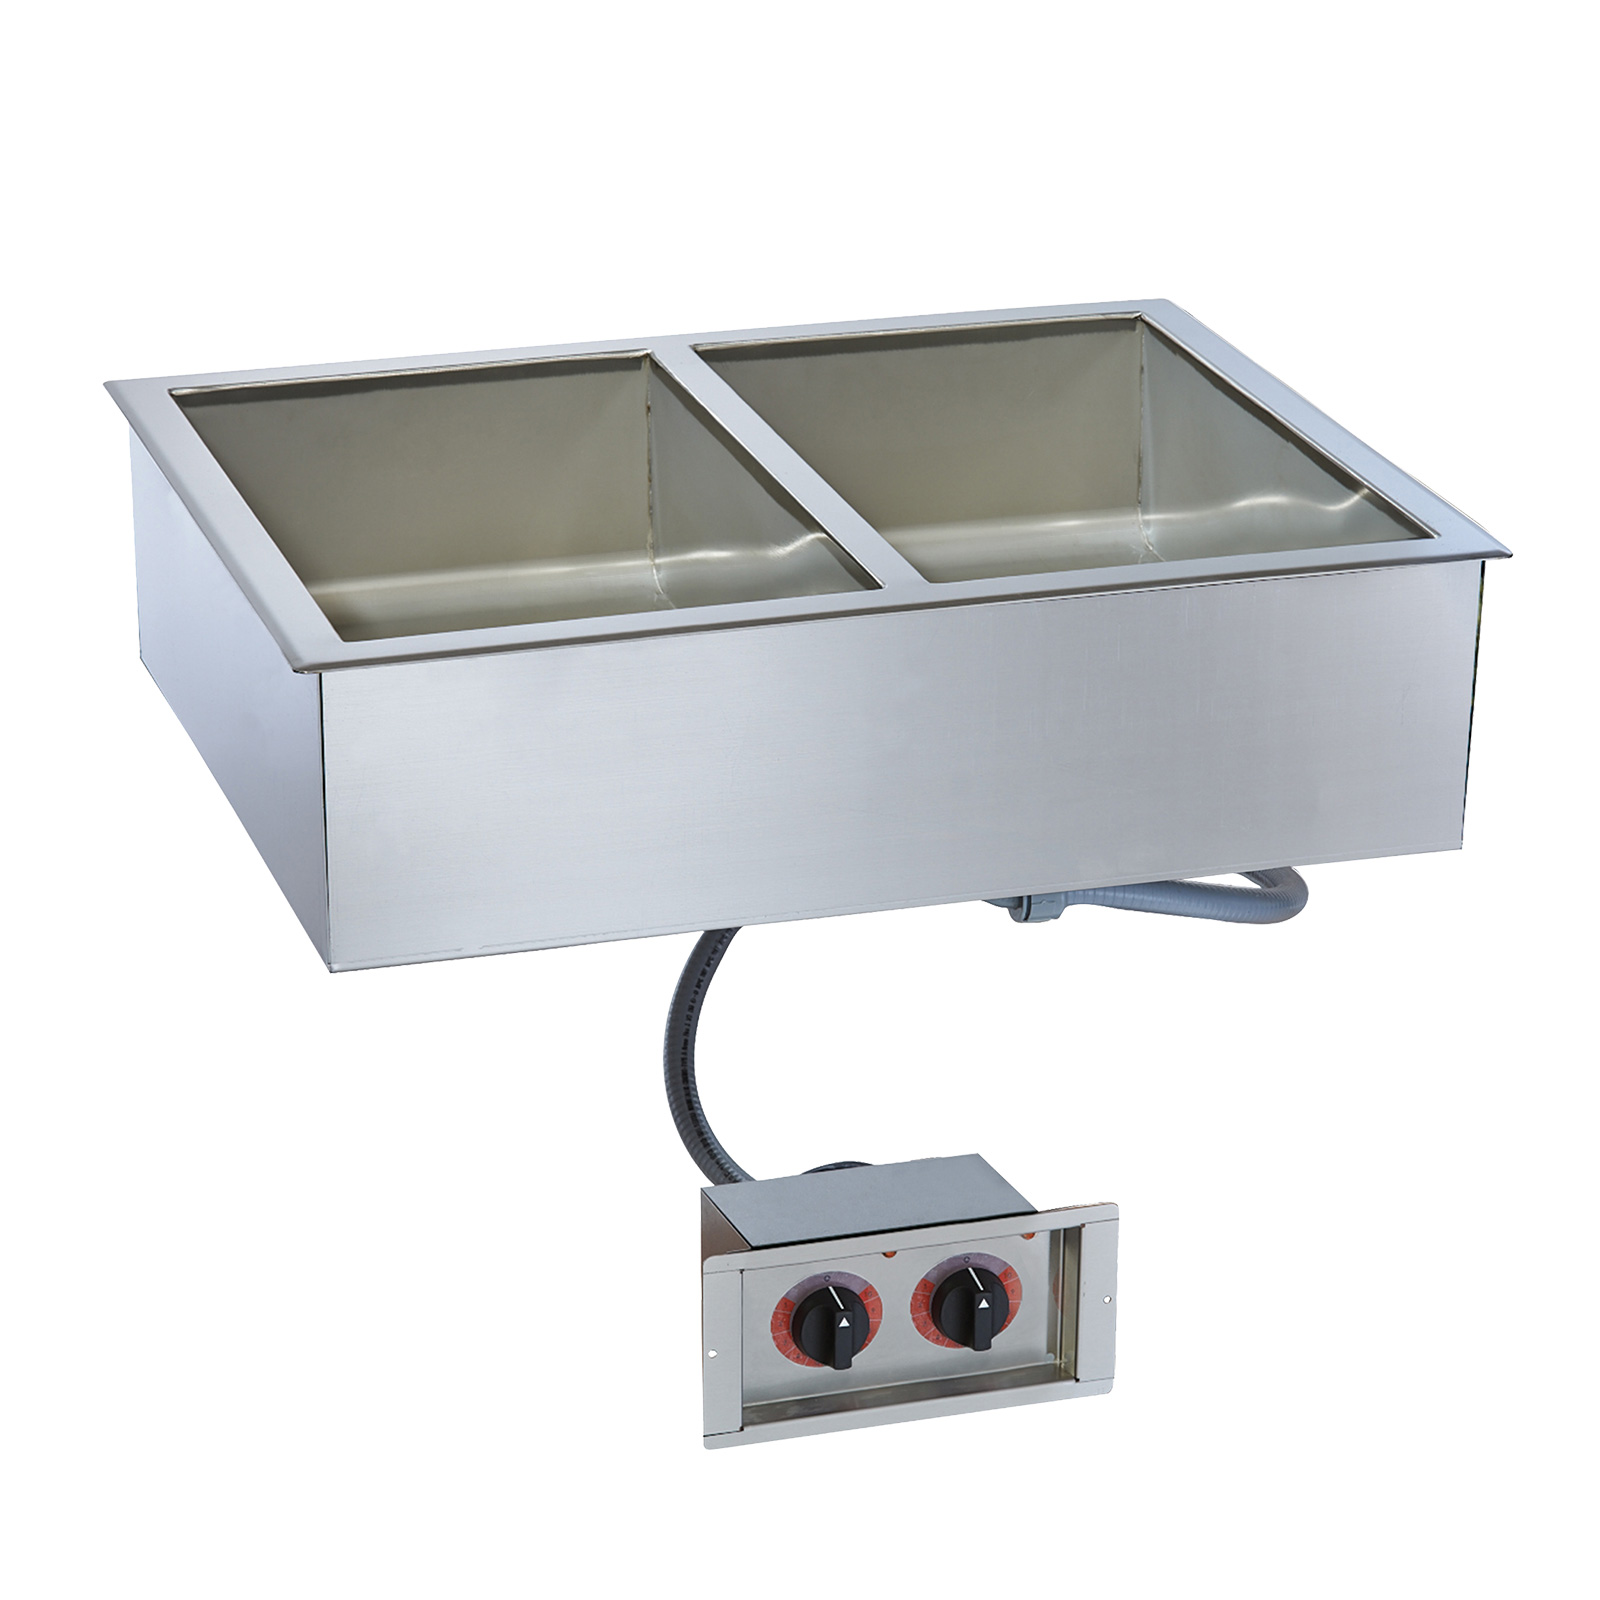 Alto-Shaam 200-HWI/D6 Hot Food Well Unit, Drop-In, Electric